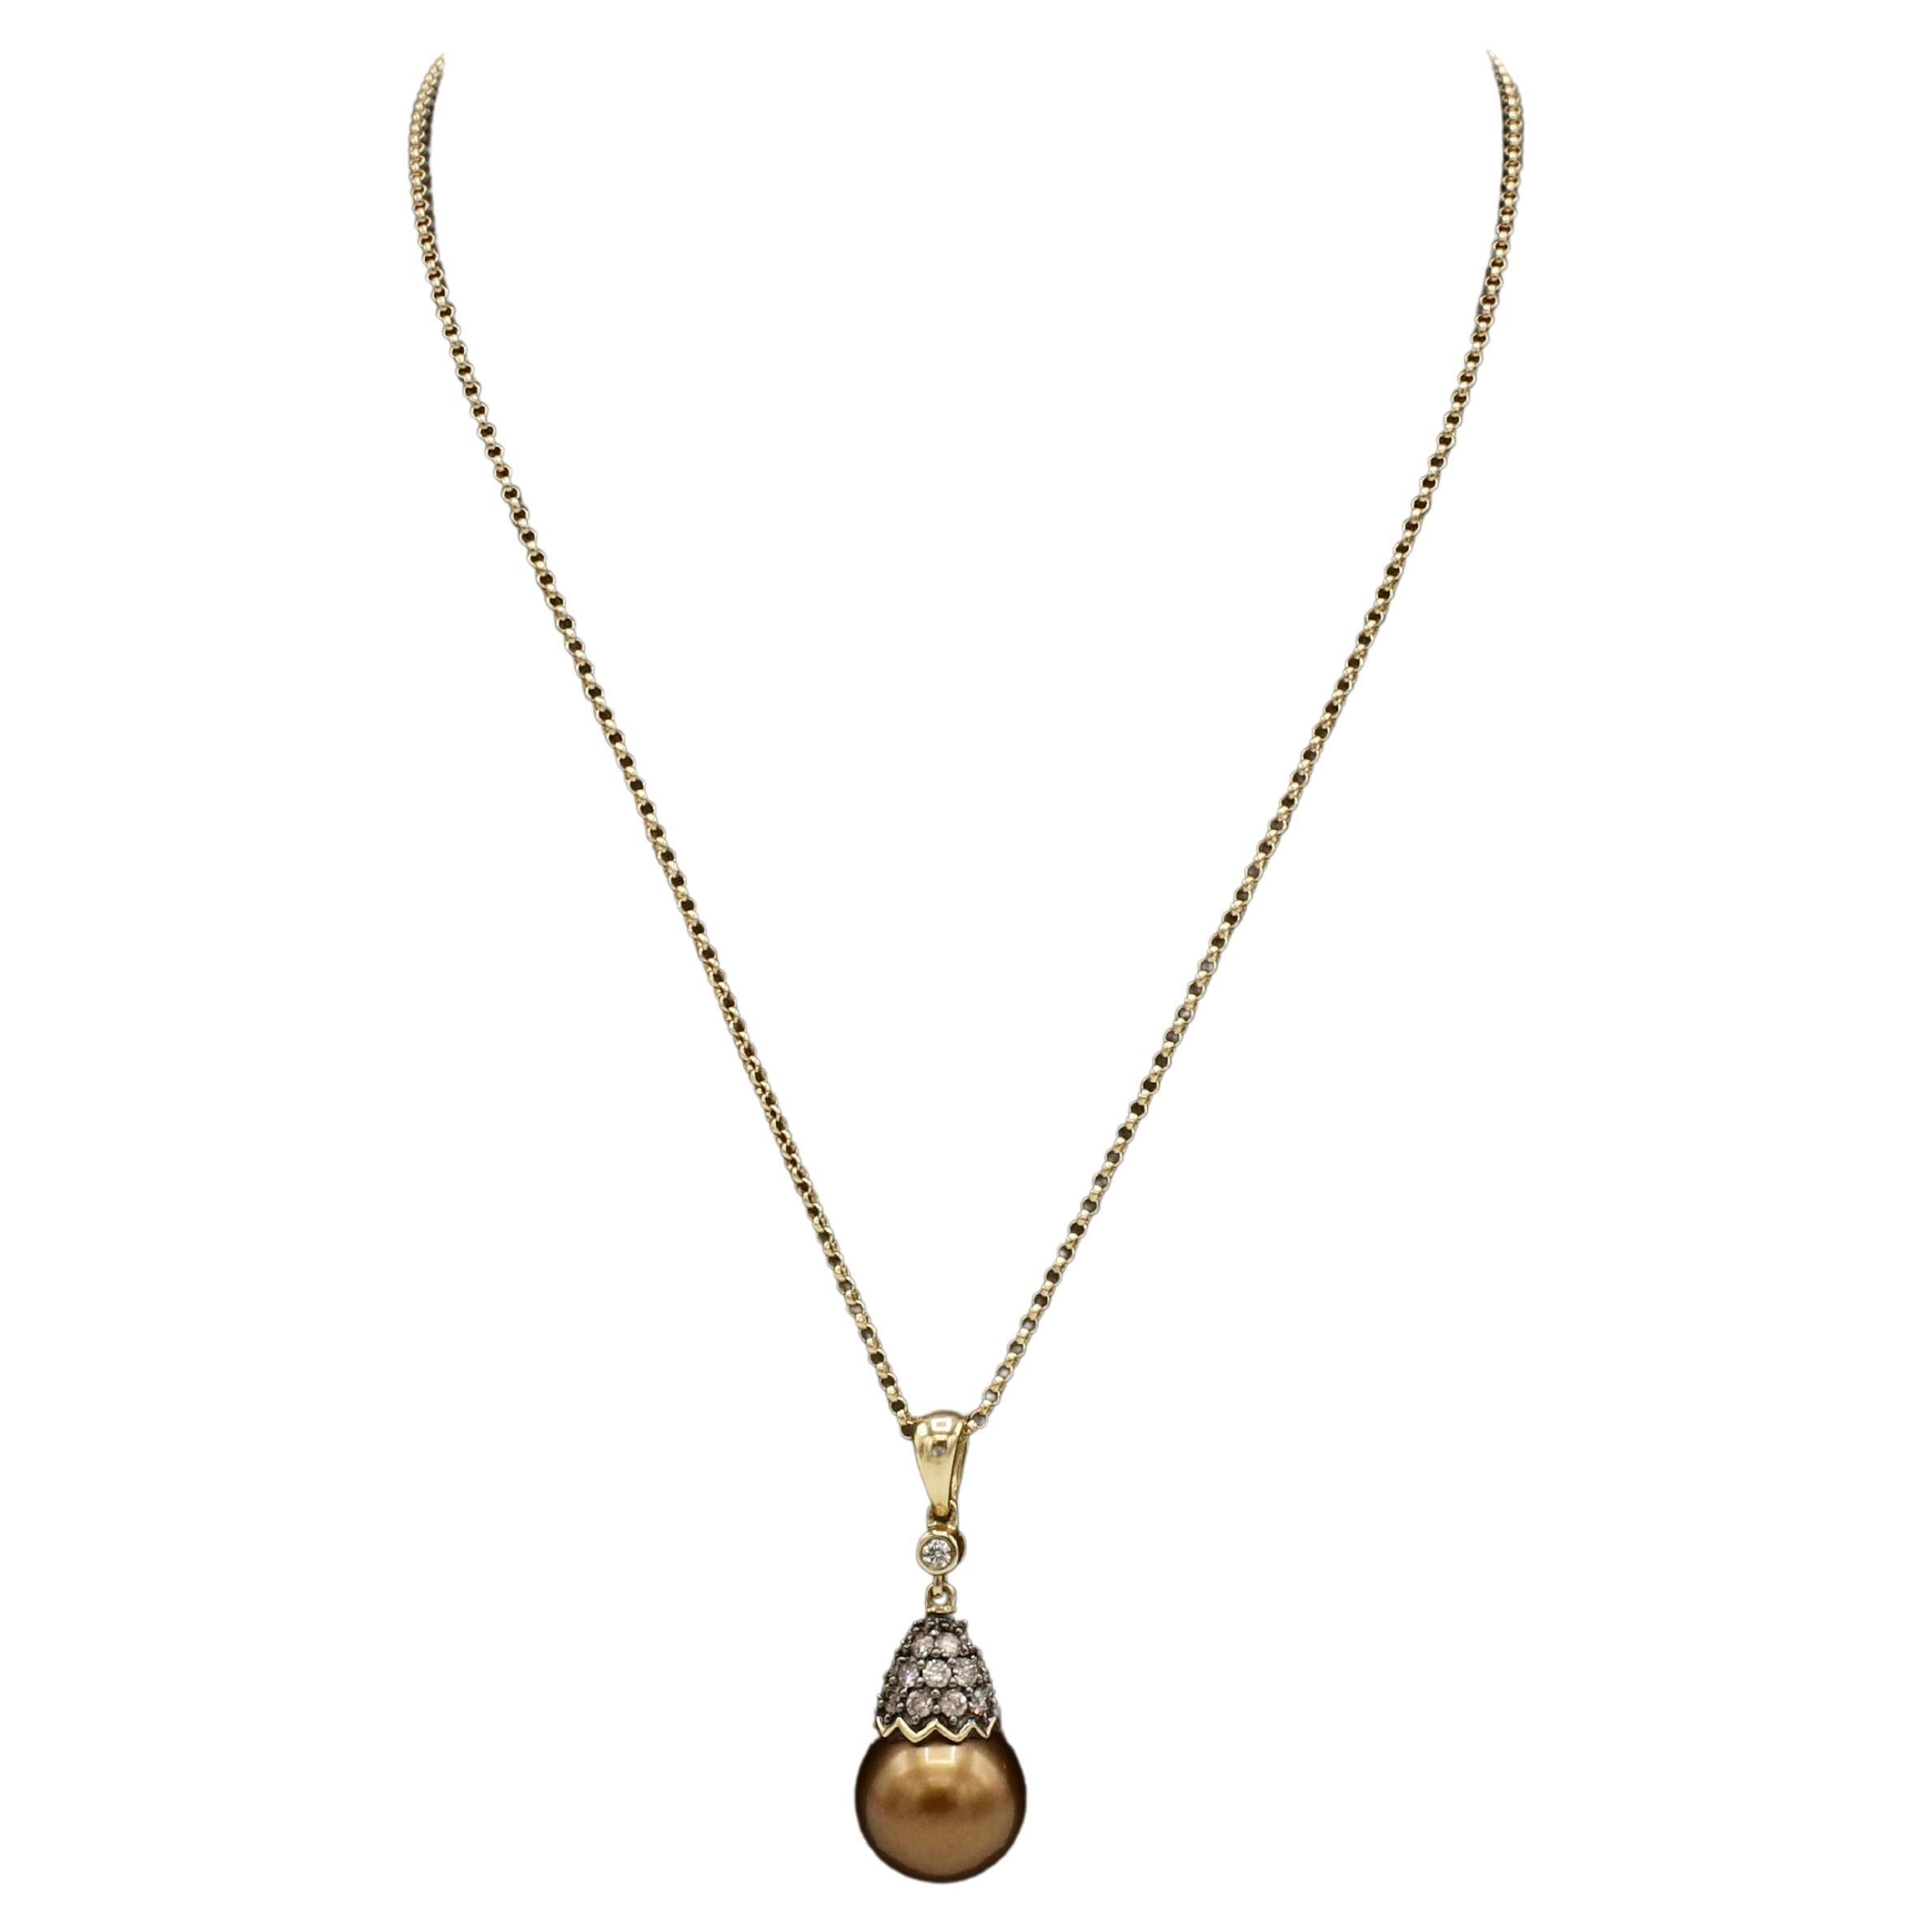 Le Vian 14 Karat Yellow Gold Brown Pearl & Natural Diamond Pendant Drop Necklace
Metal: 14k yellow gold
Weight: 4.49 grams
Diamonds: Approx. .33 CTW round natural brown & G colored SI diamonds
Chain length: 20 inches
Pendant: 28mm
Pearl: 10mm